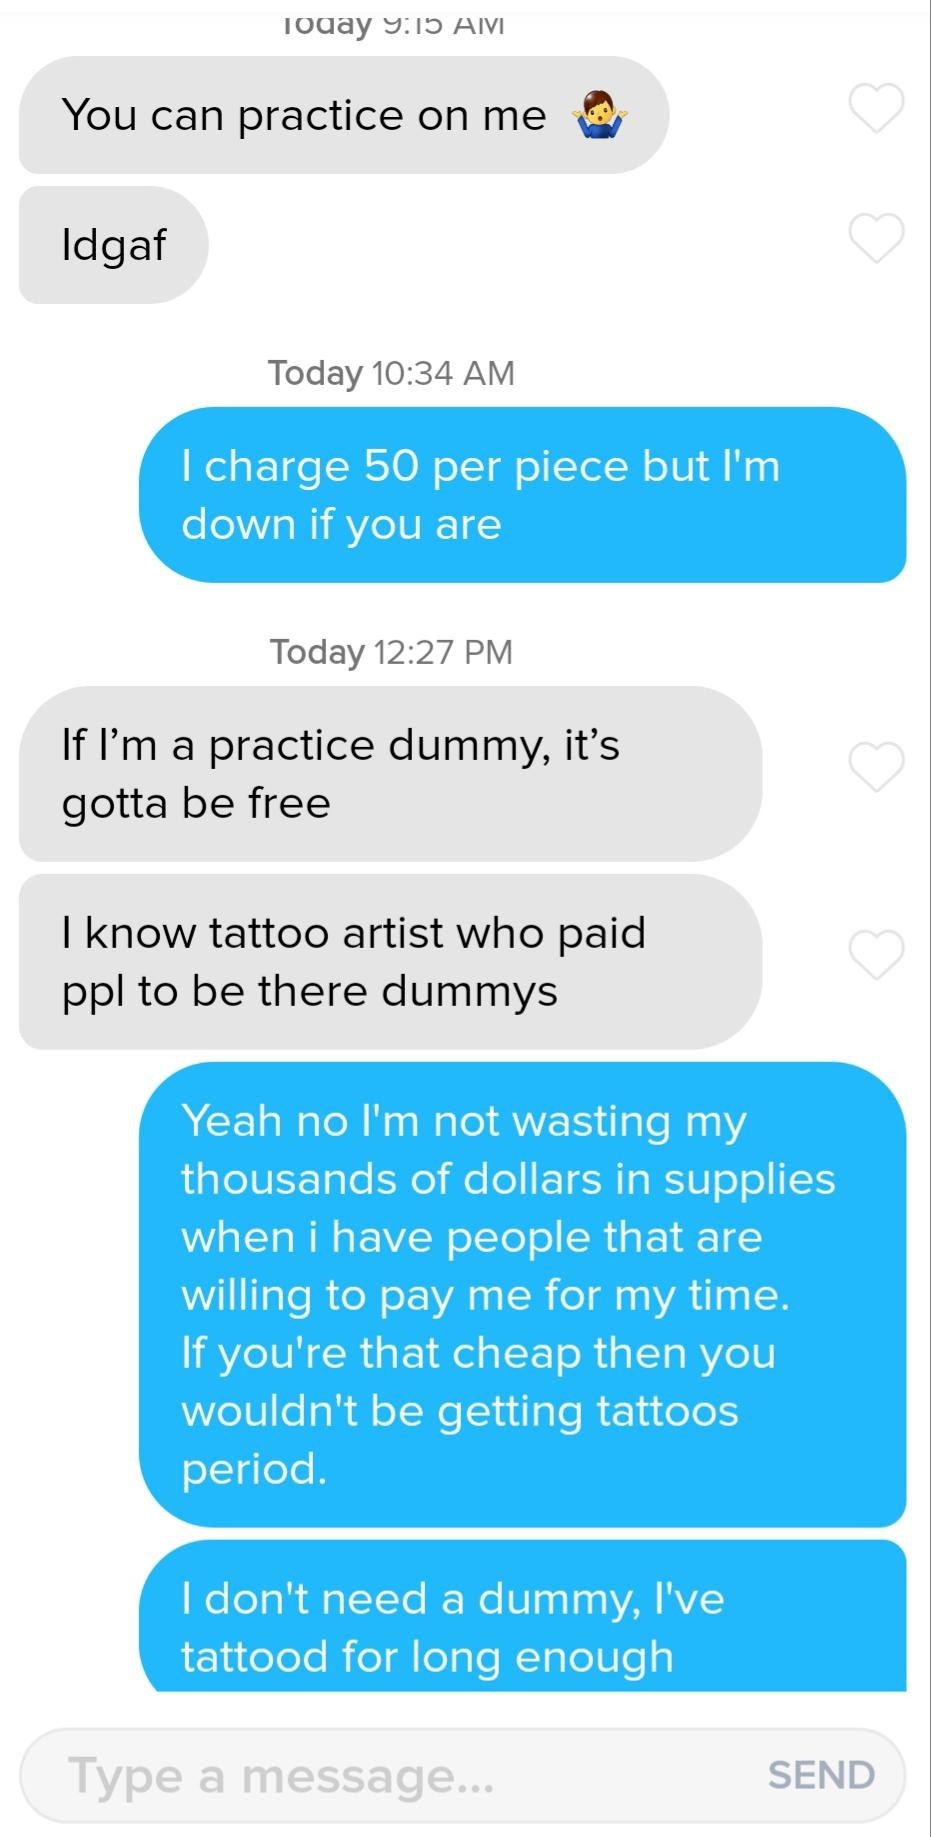 Text exchange ending with, &quot;Yeah no I&#x27;m not wasting my thousands of dollars in supplies when i have people that are willing to pay me for my time. If you&#x27;re that cheap then you wouldn&#x27;t be getting tattoos period.&quot;